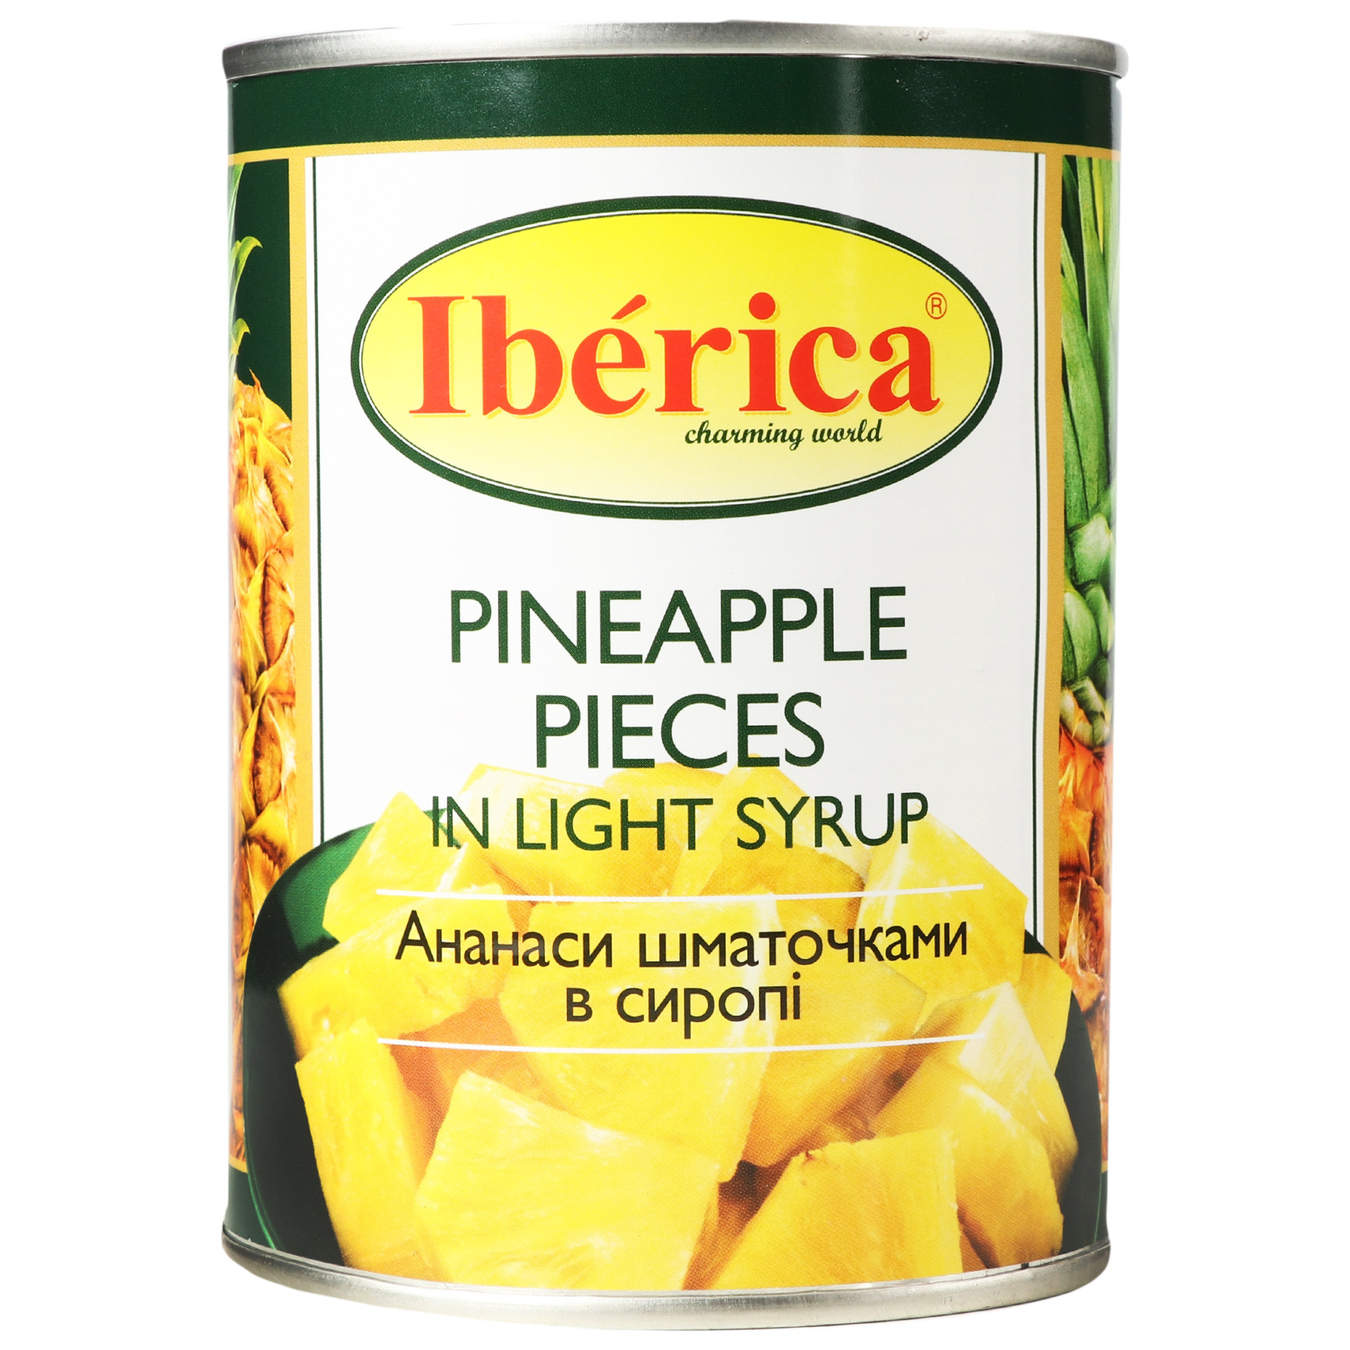 Canned Iberica pineapple pieces 565g